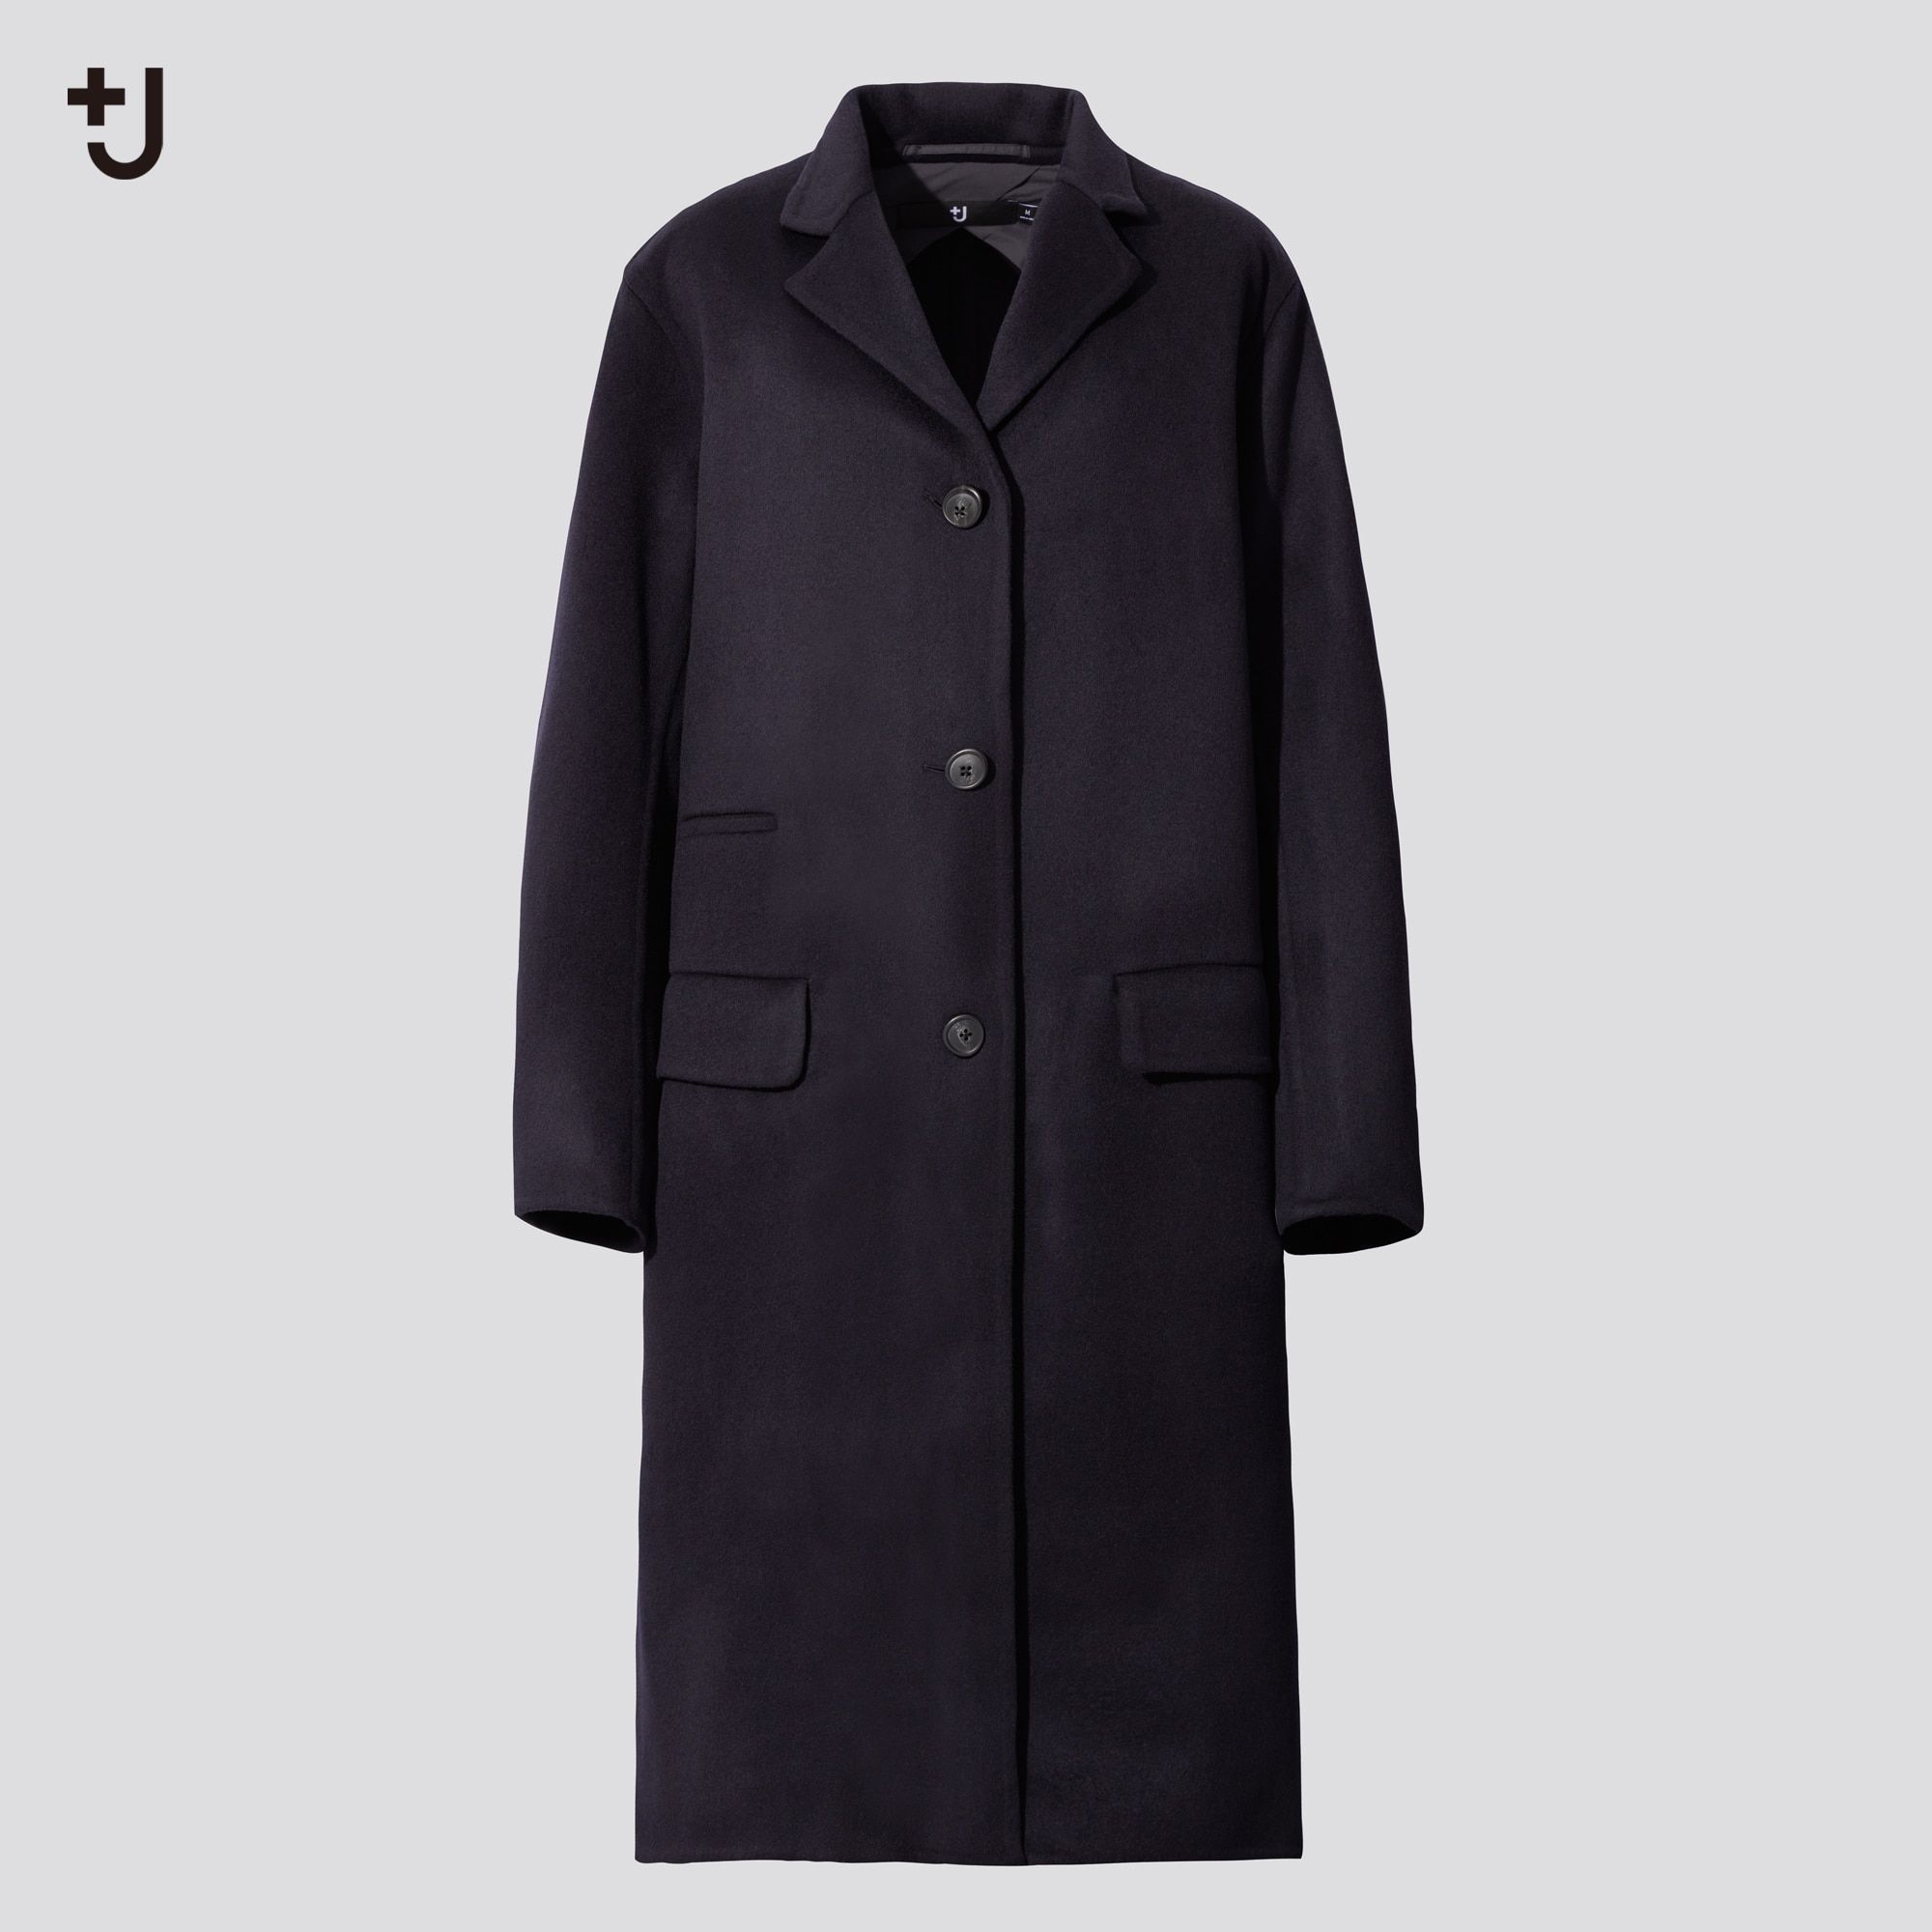 Uniqlo Releases New +J Collaboration with Jil Sander